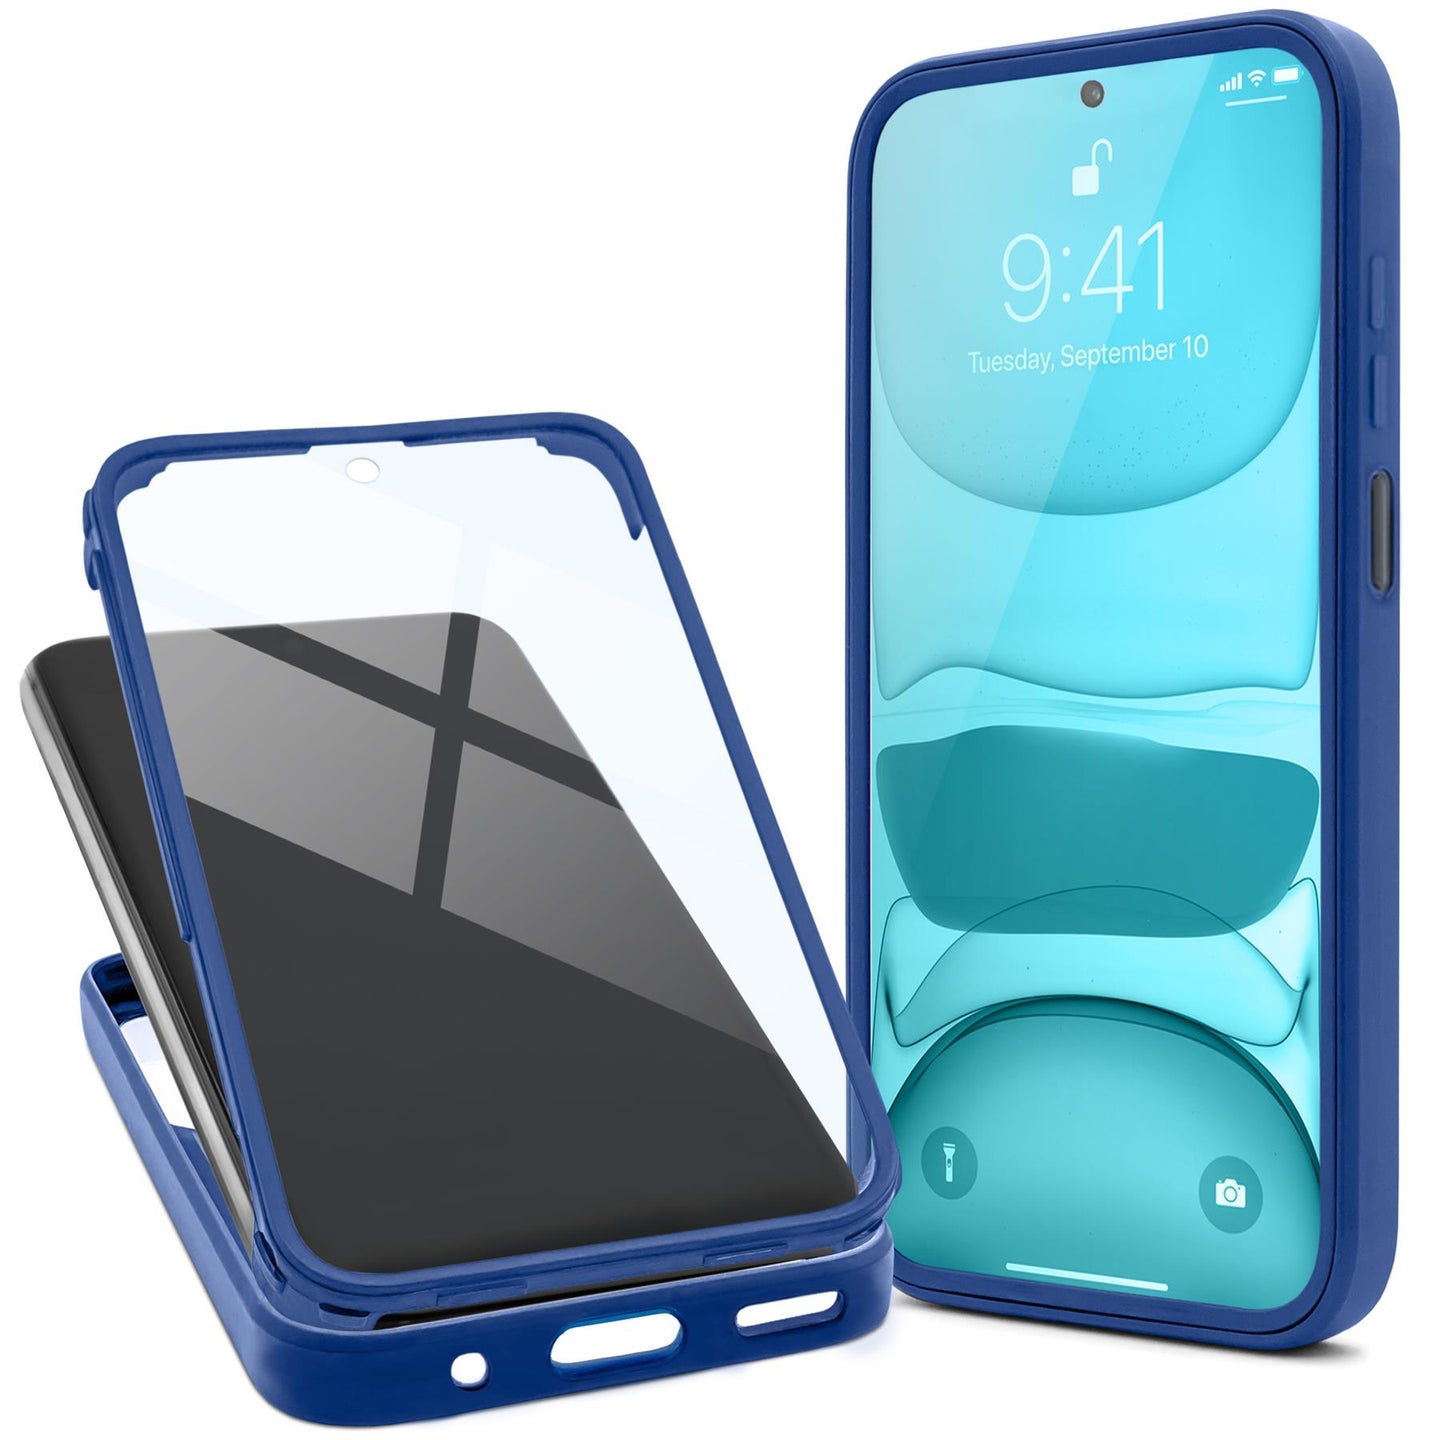 Moozy 360 Case for Xiaomi Redmi Note 11 and 11S - Blue Rim Transparent Case, Full Body Double-sided Protection, Cover with Built-in Screen Protector